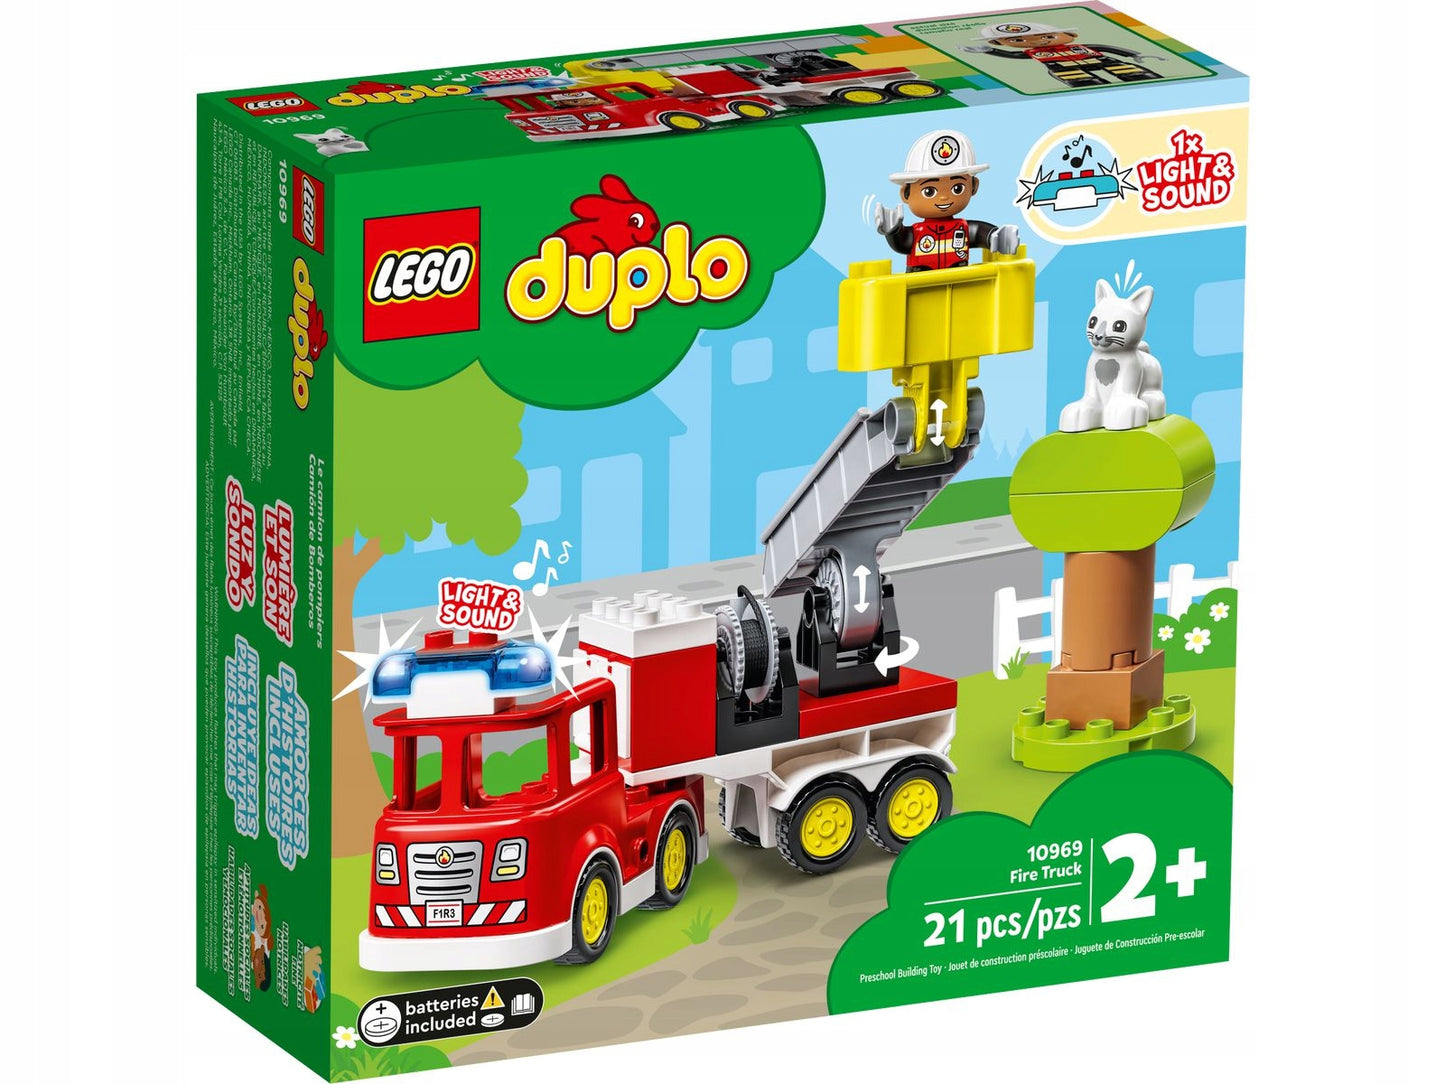 LEGO Duplo Fire truck and firemen